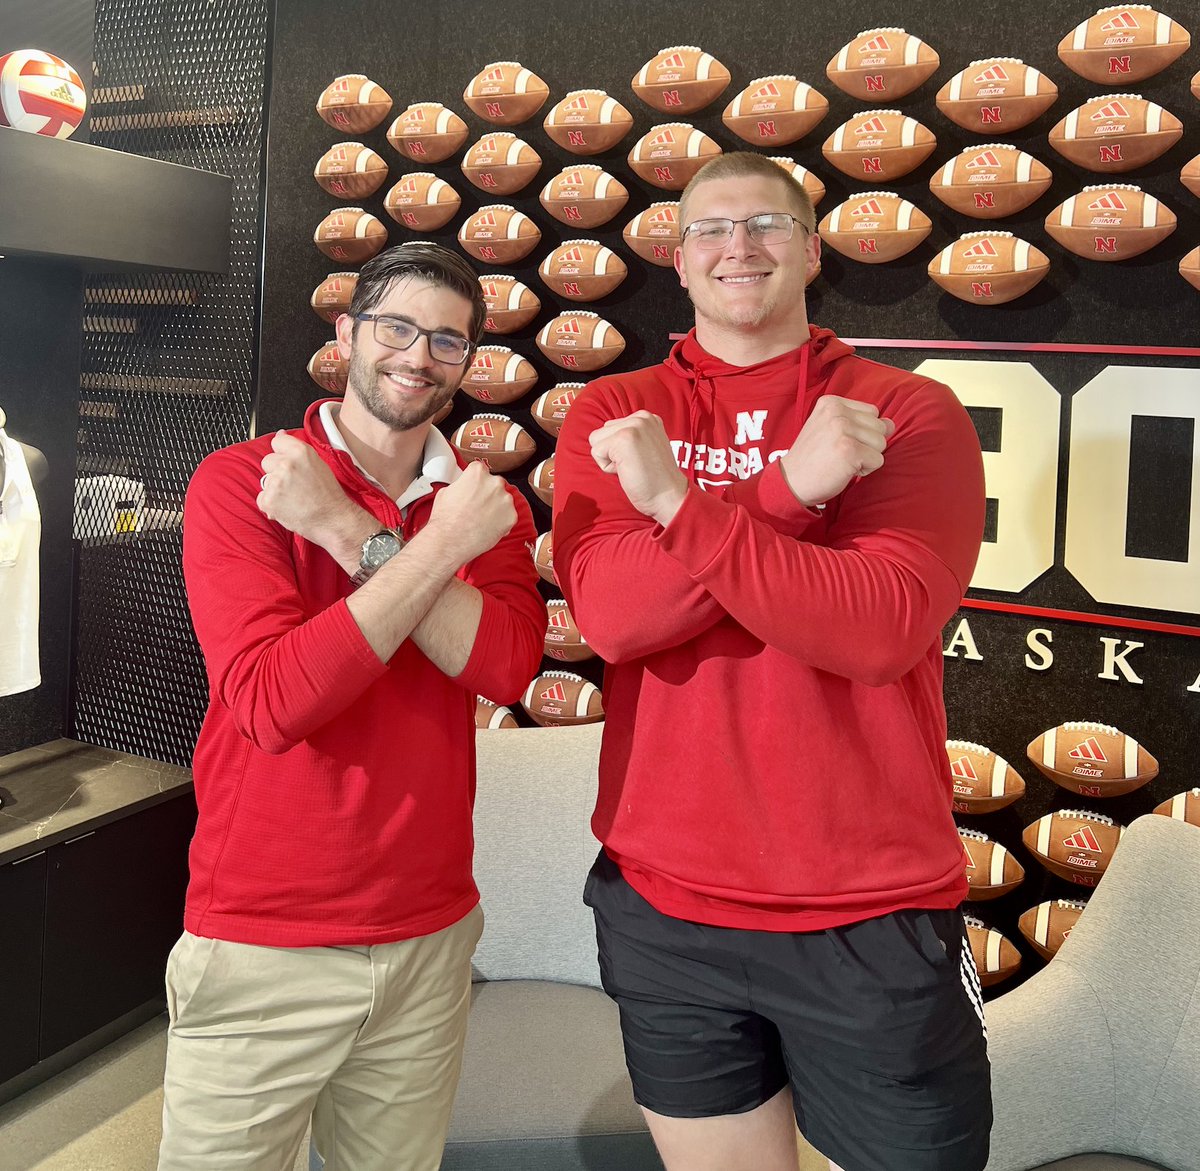 🔴🏈⚪️: @HuskerFootball defensive lineman @T_ROB99 chatted with Brandon Aksamit for the @1890Initiative Big Red Rally on @NewsChannelNE! 📺️️ Click the link below to support Husker student-athletes through NIL: tinyurl.com/4sse2myp #BigRedRally #1890 #NIL